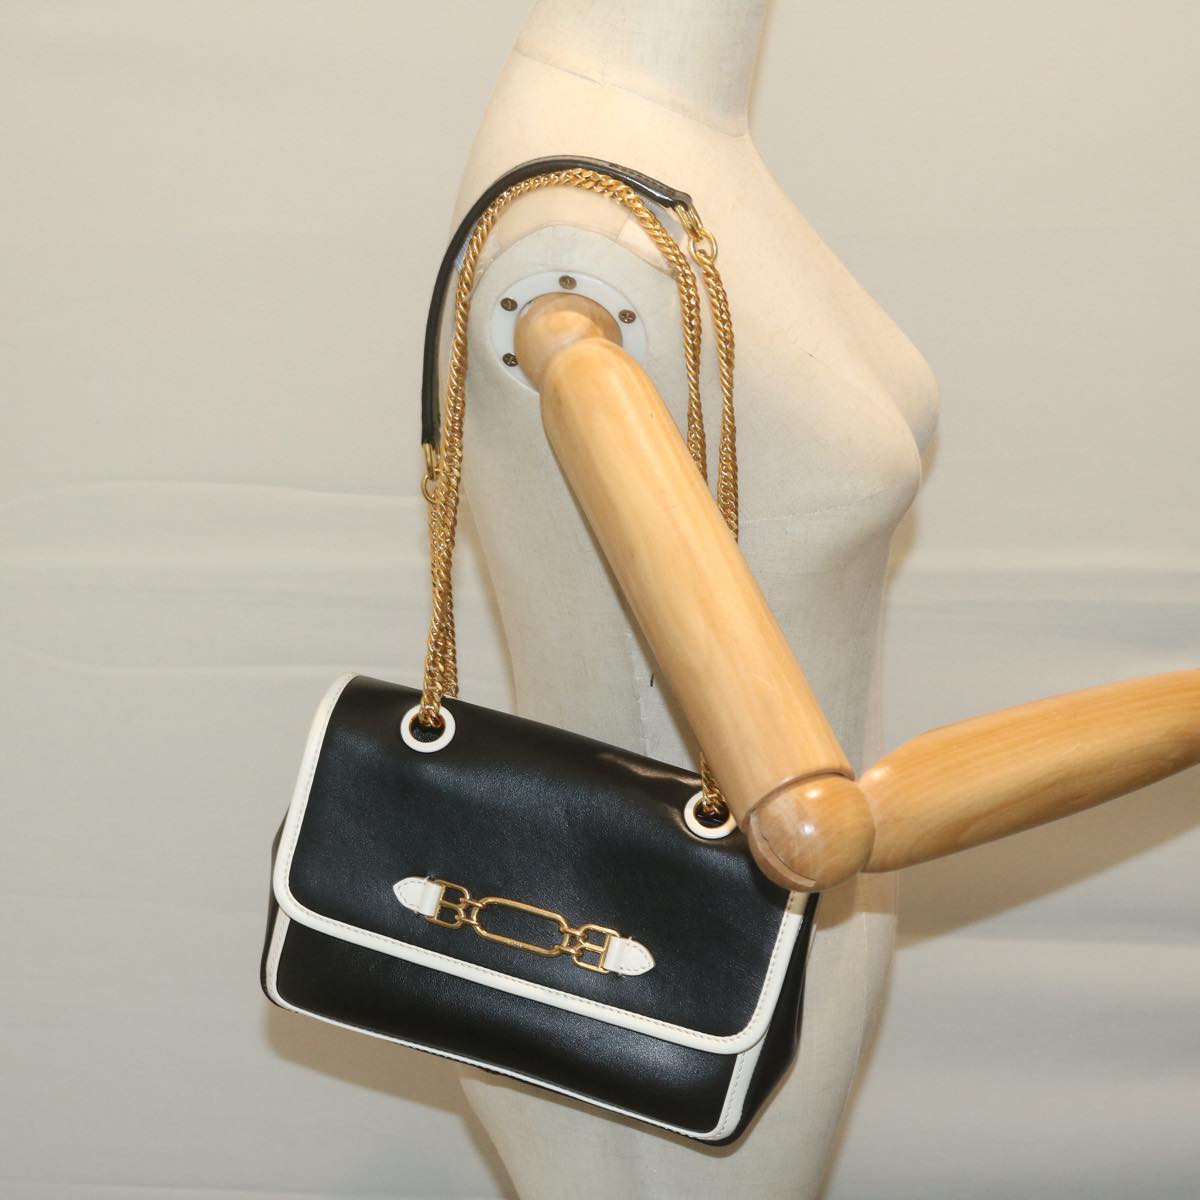 BALLY Chain Shoulder Bag Leather Black White Auth yk10275